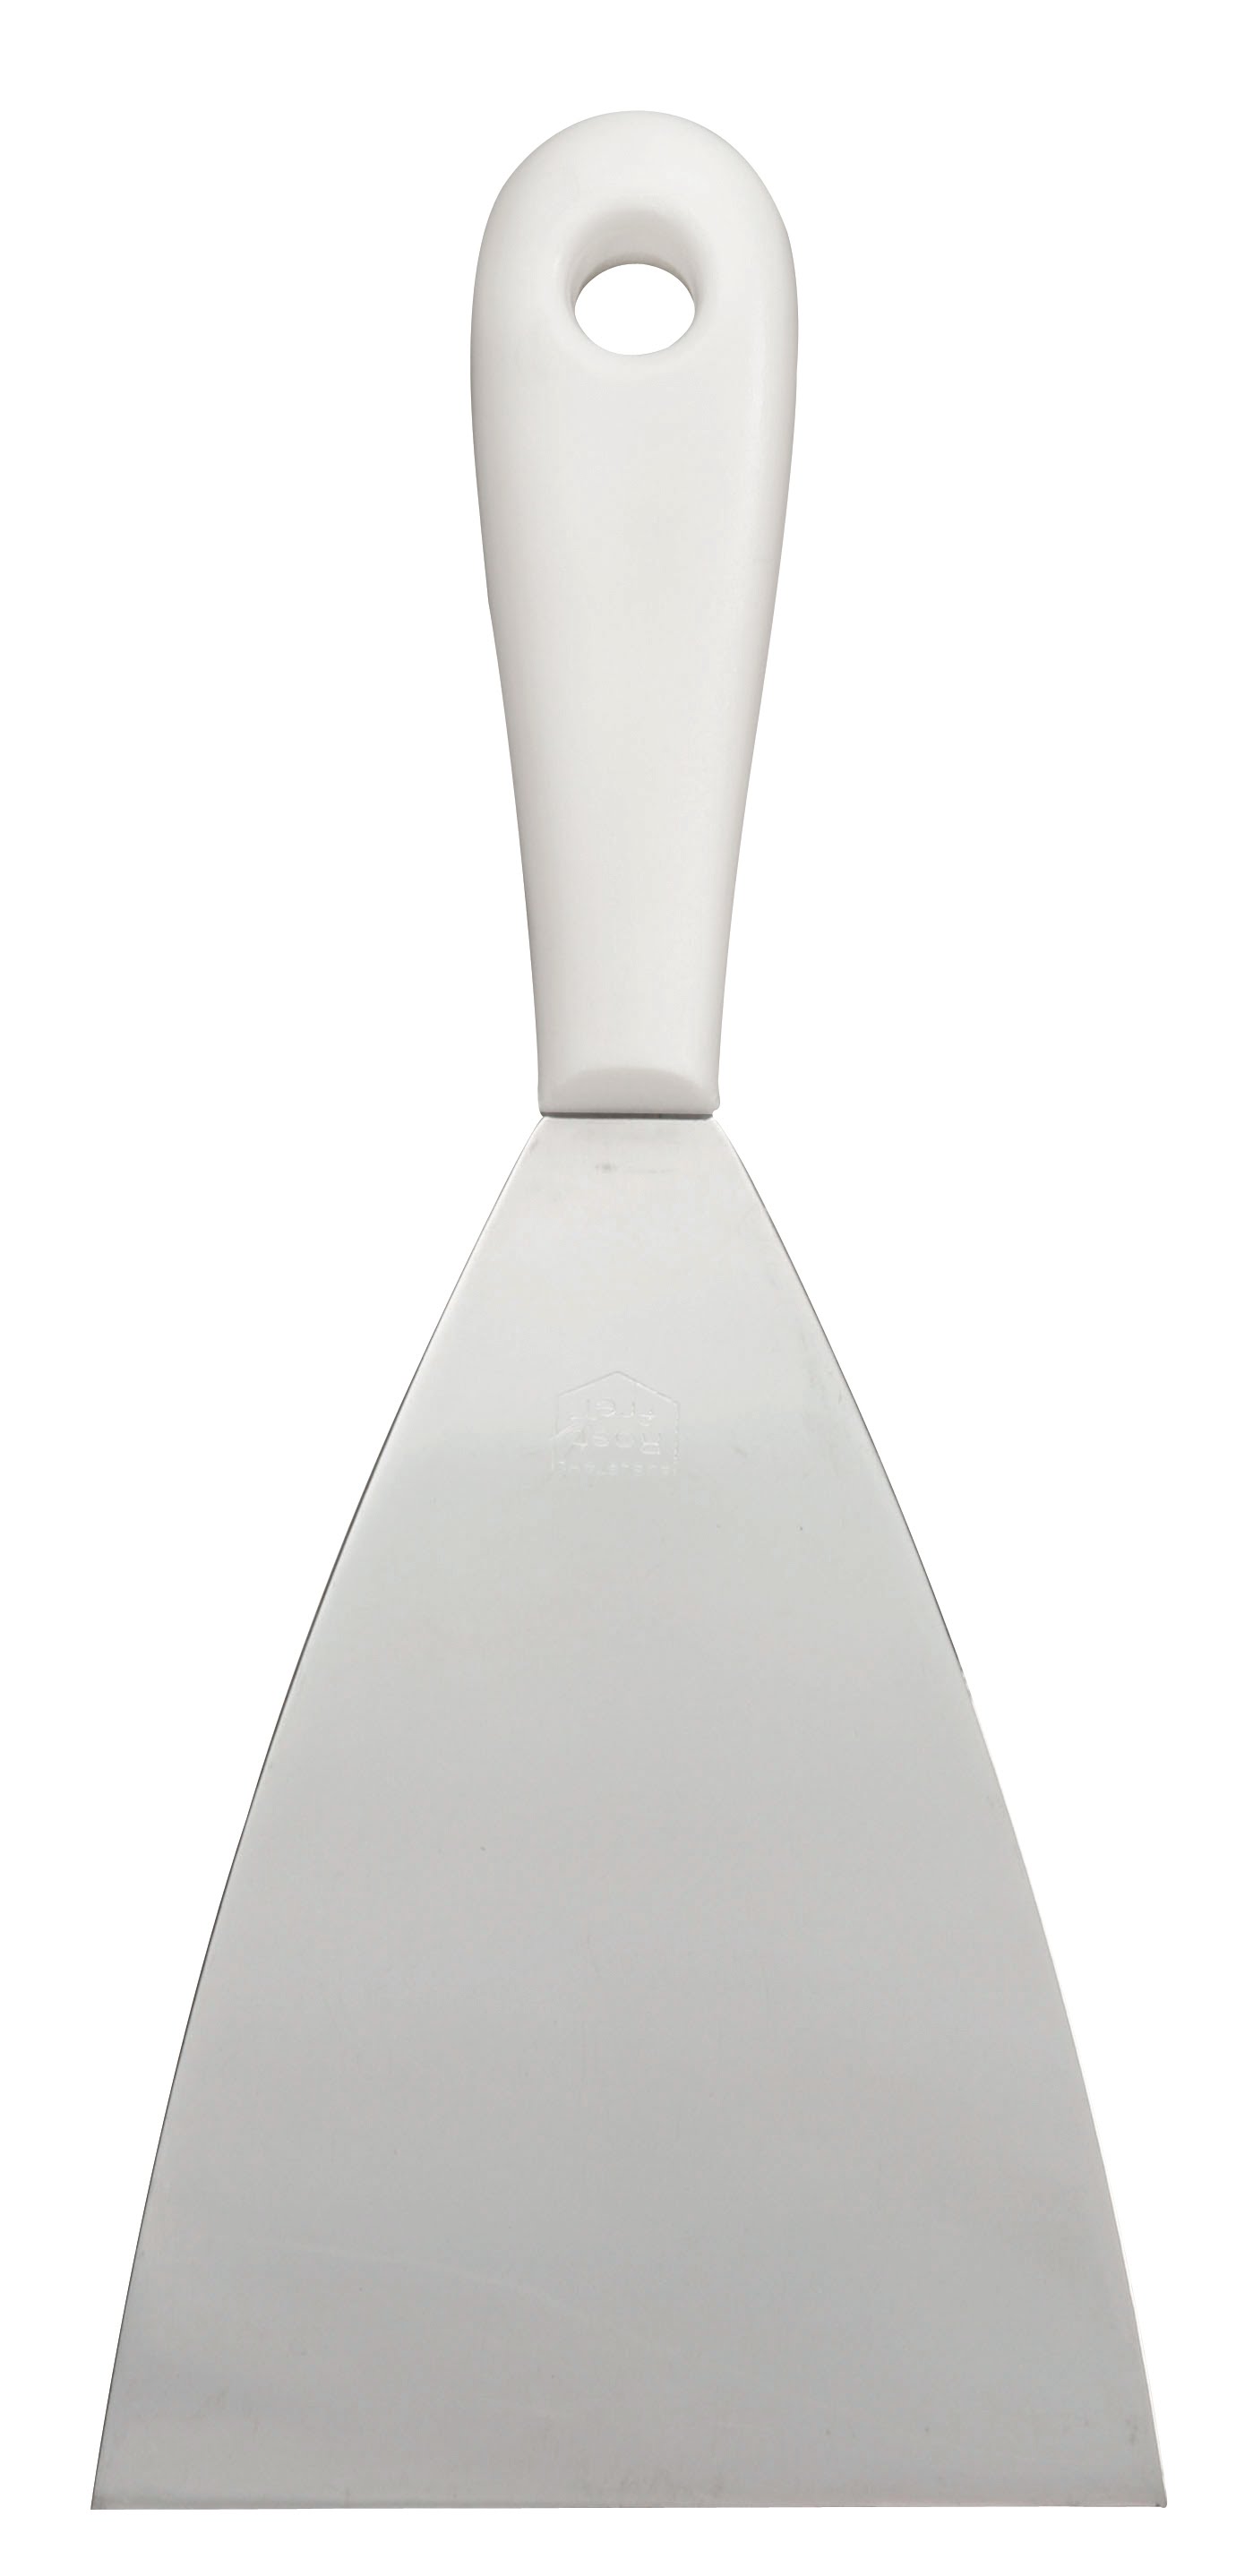   DI Spatula Stainless Stee Gray